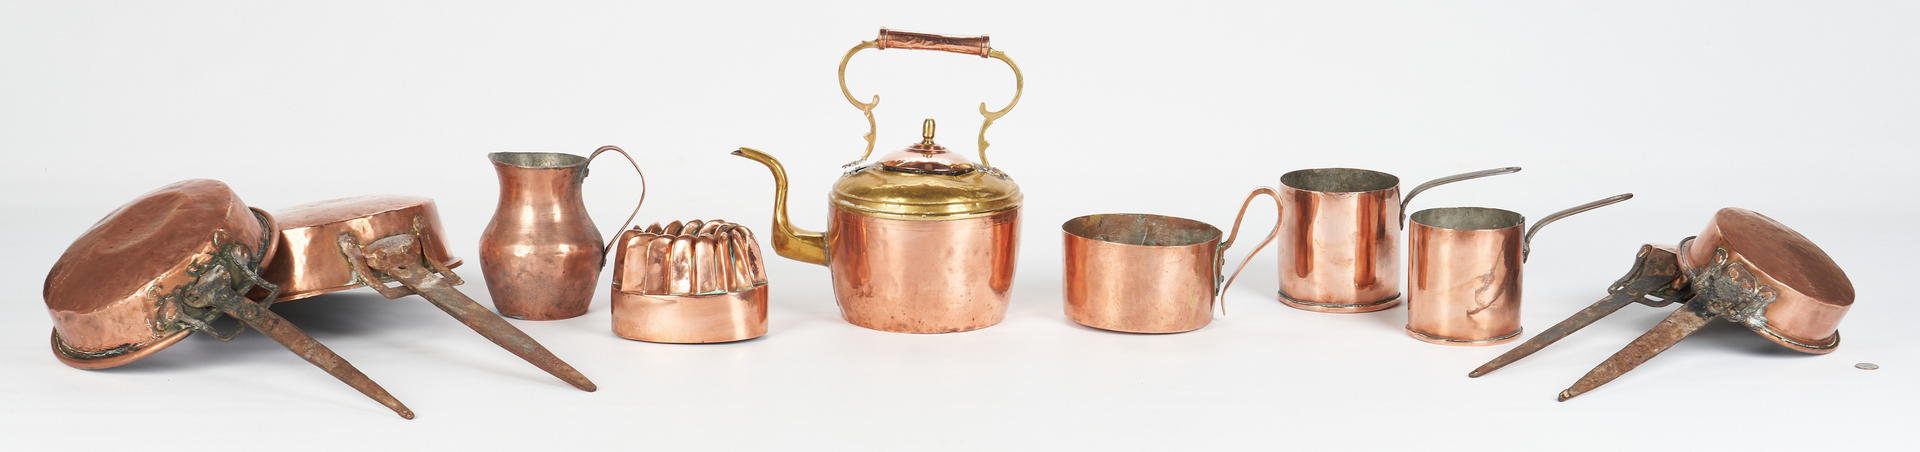 Lot 1049: 10 pcs. Early Copper Cookware inc. Signed